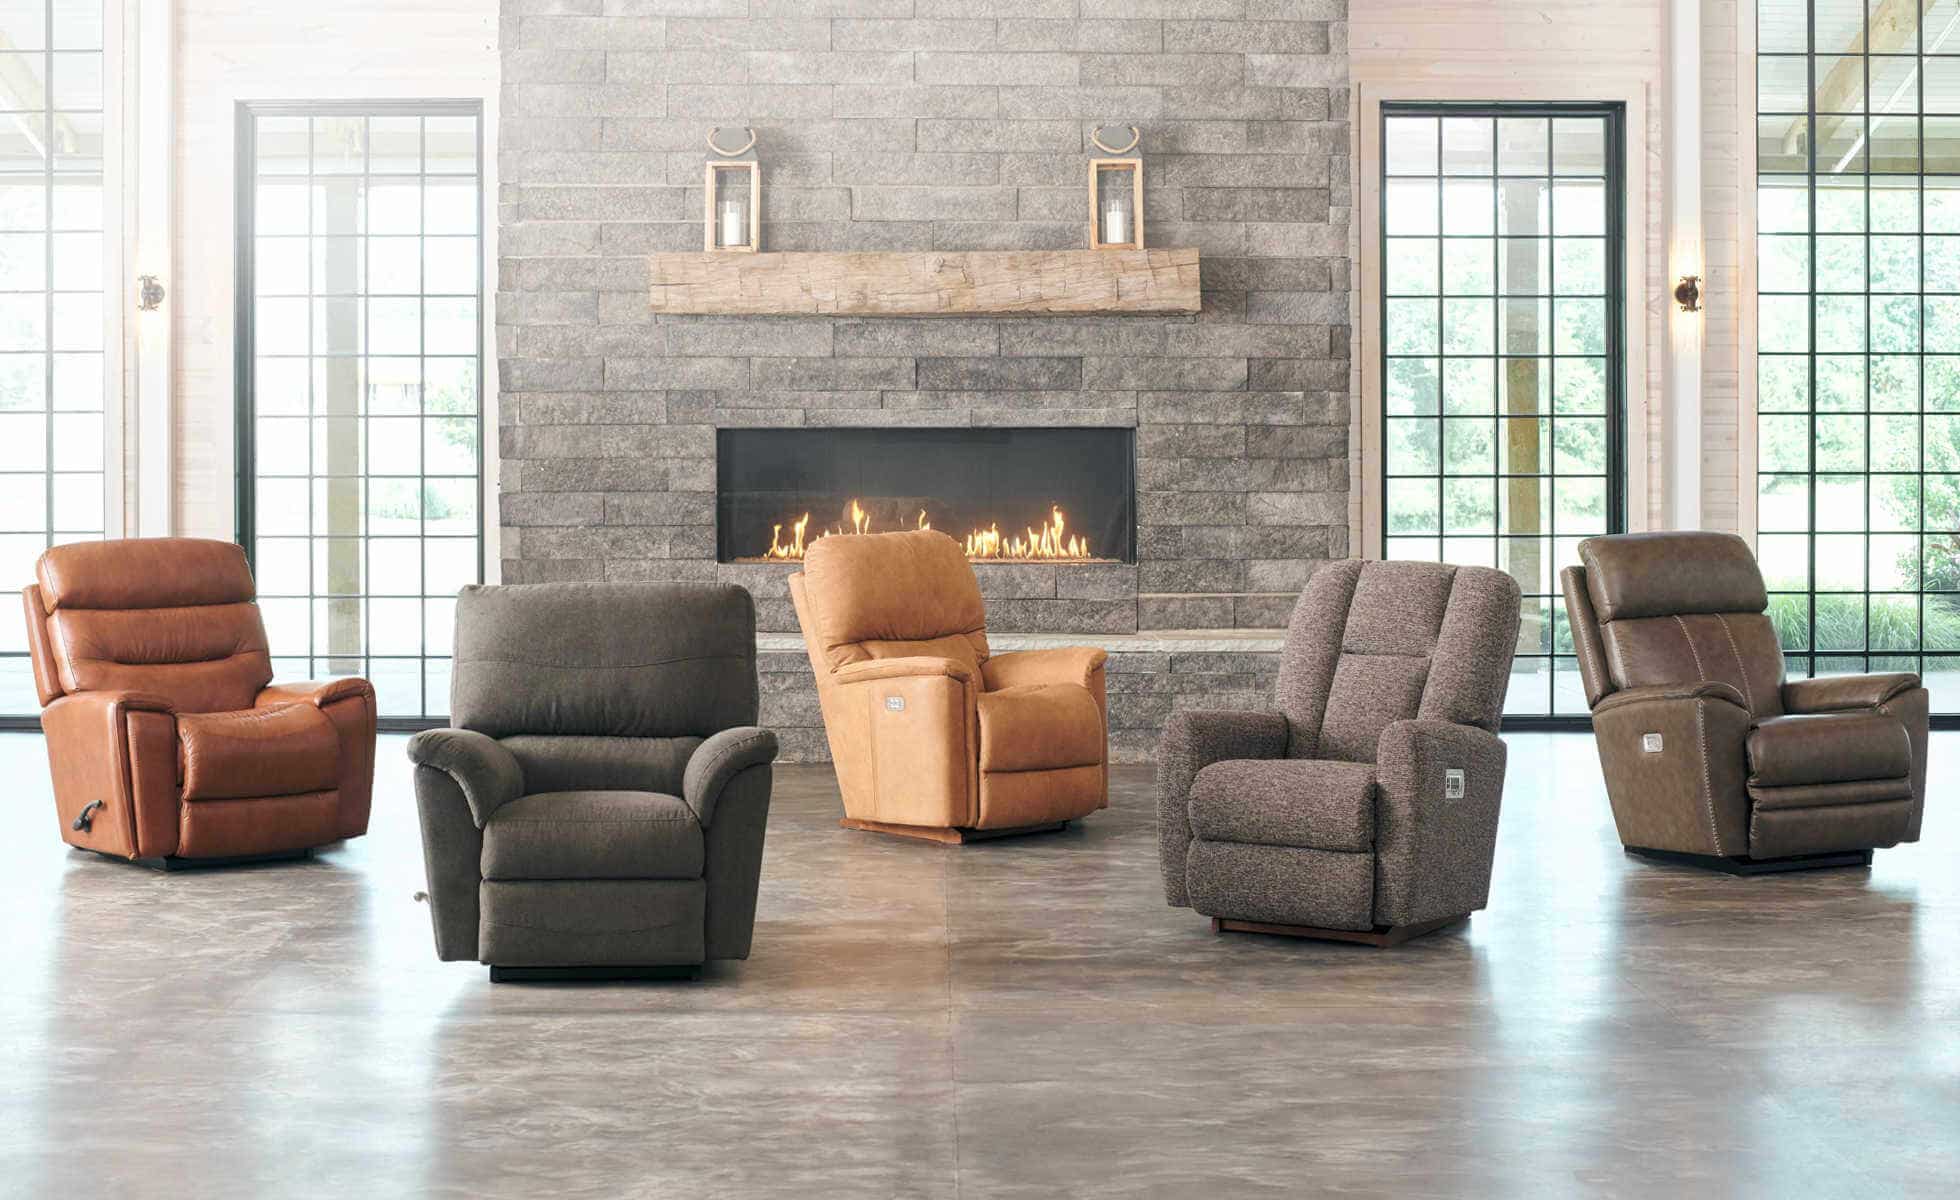 Oasis-pulse-lift-recliner-chairs